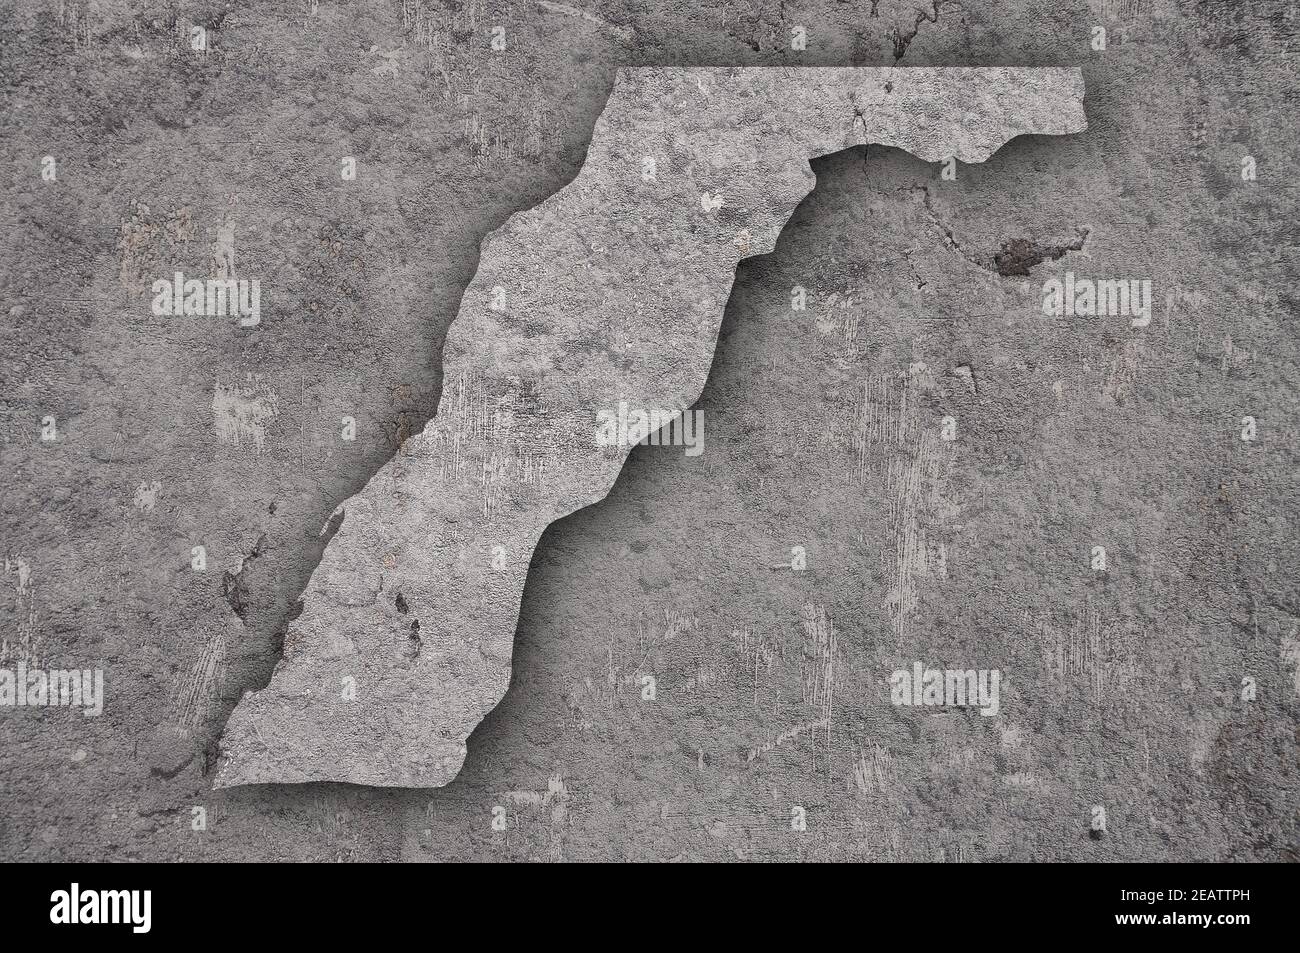 Map of Western Sahara on weathered concrete Stock Photo